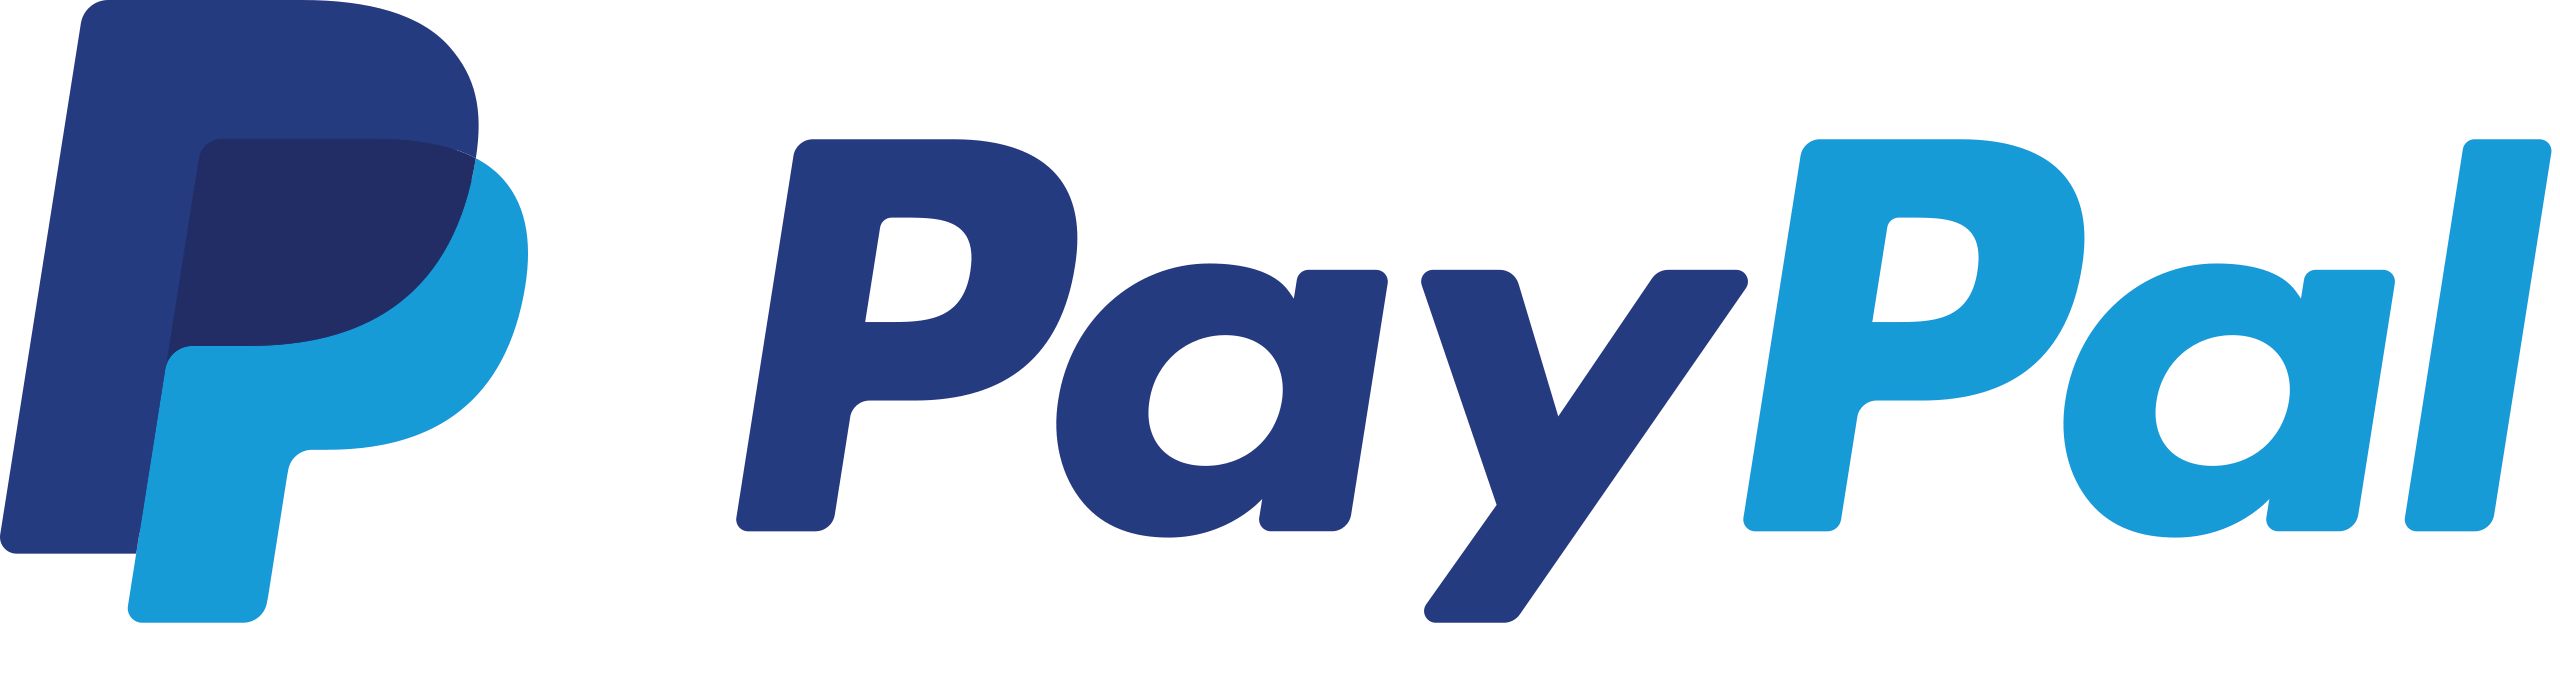 The official logo of PayPal